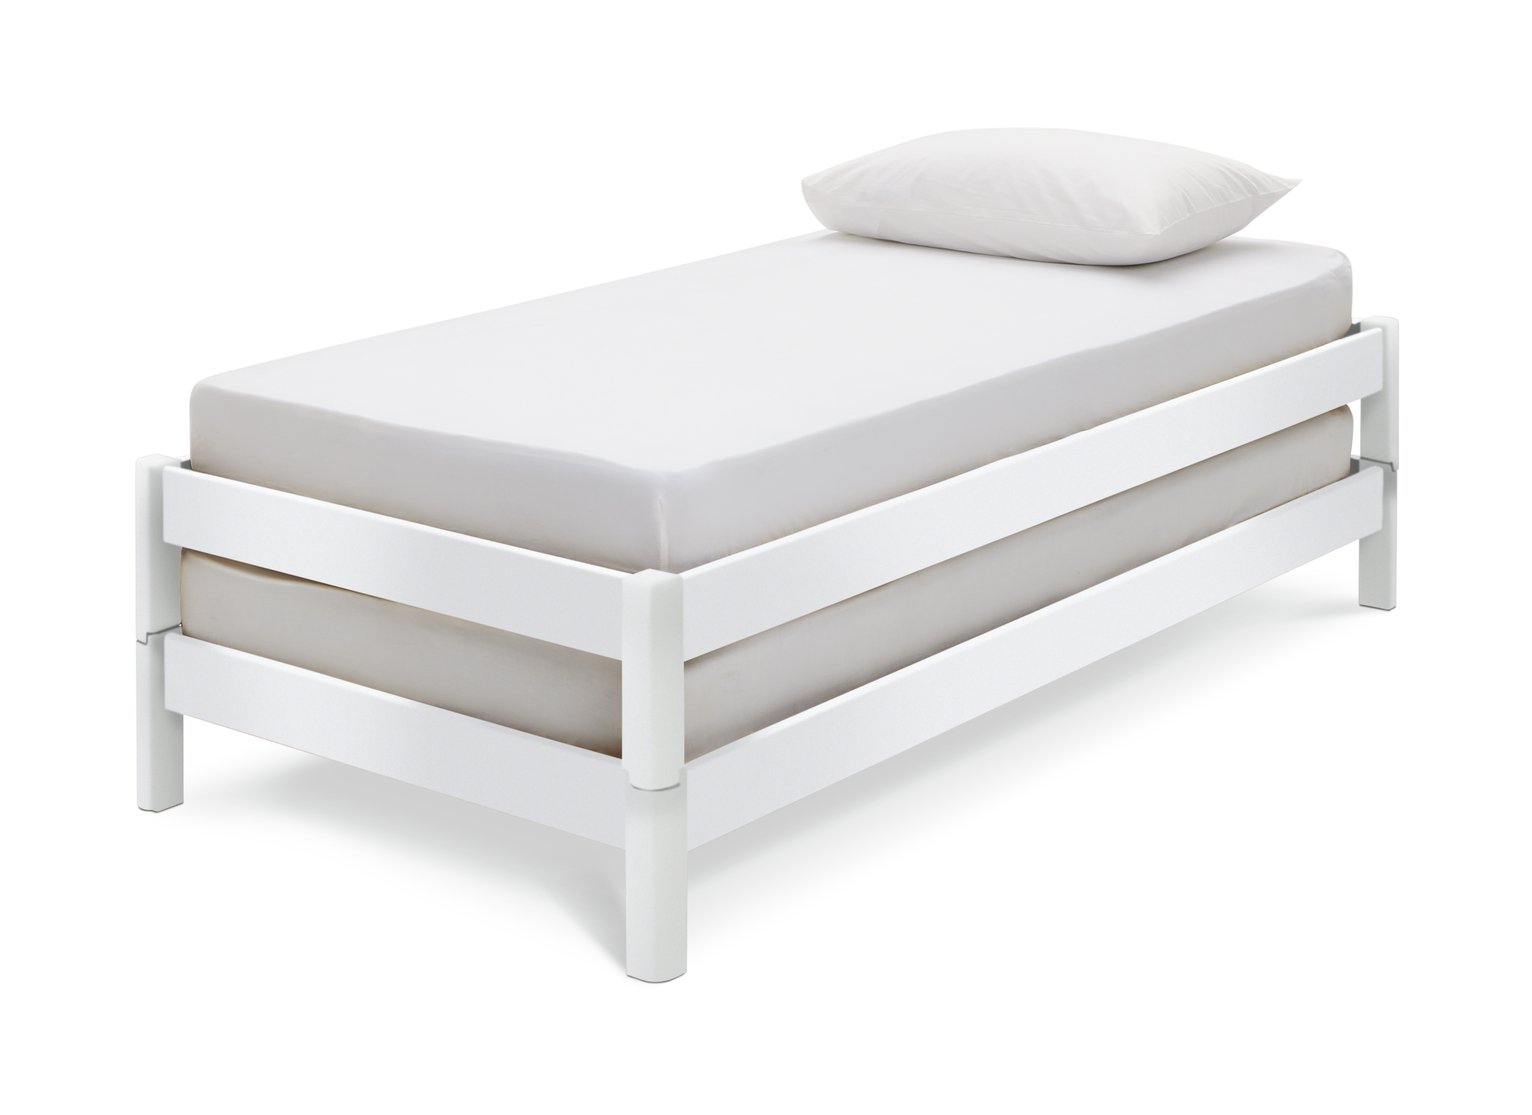 Habitat Odin Stacking Guest Bed- White